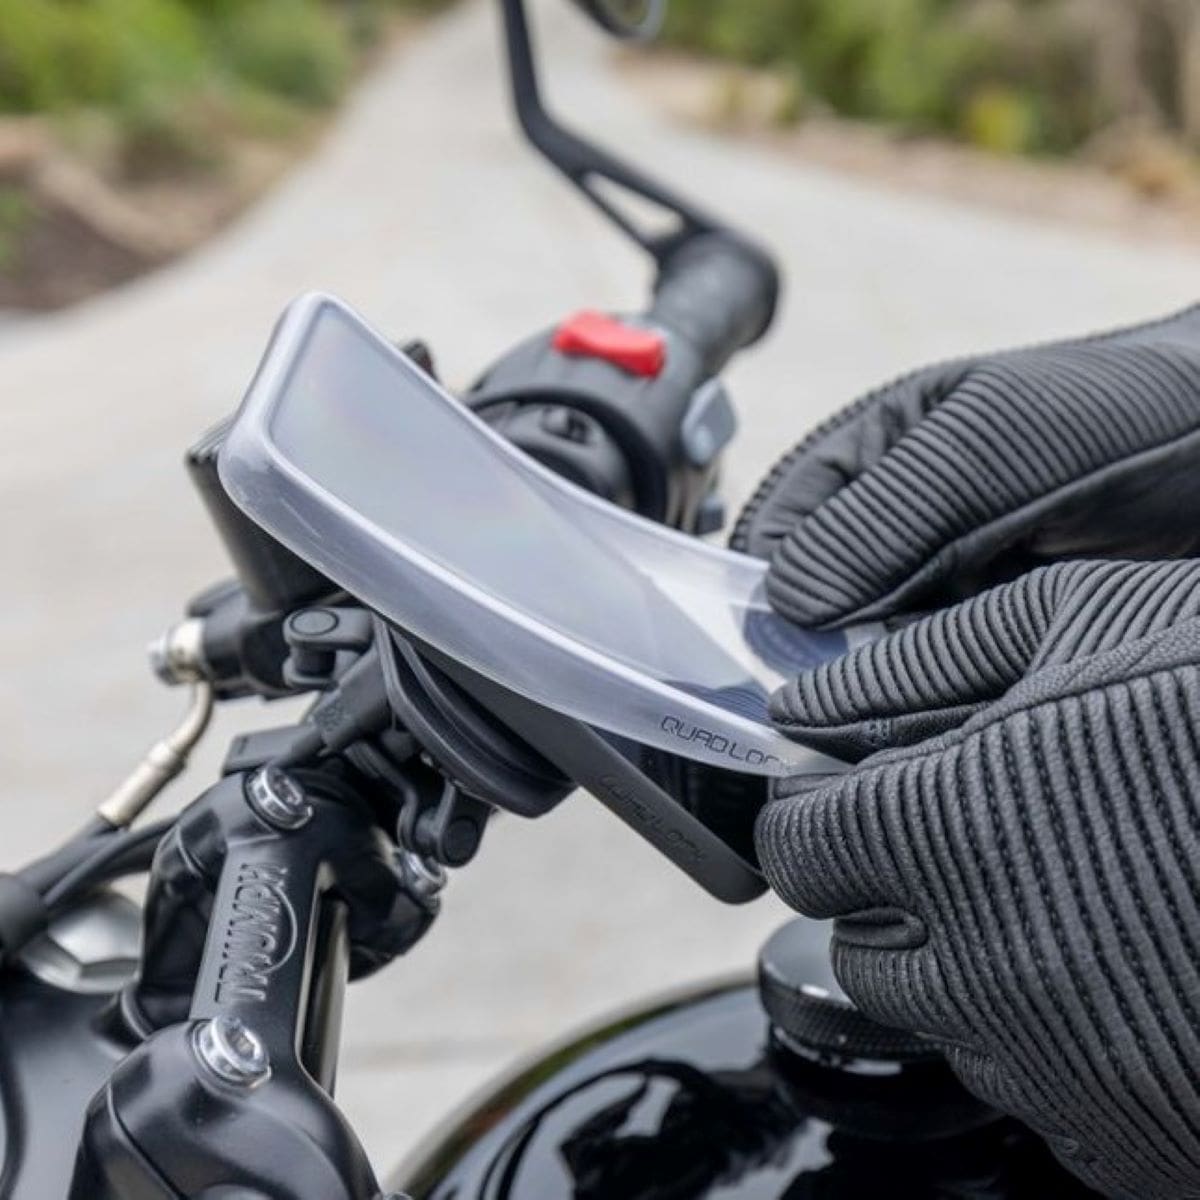 The Quad Lock MAG phone case needs an optional Quad Lock MAG 'Poncho' rain cover if you want to use the mobile phone mount in all weathers.